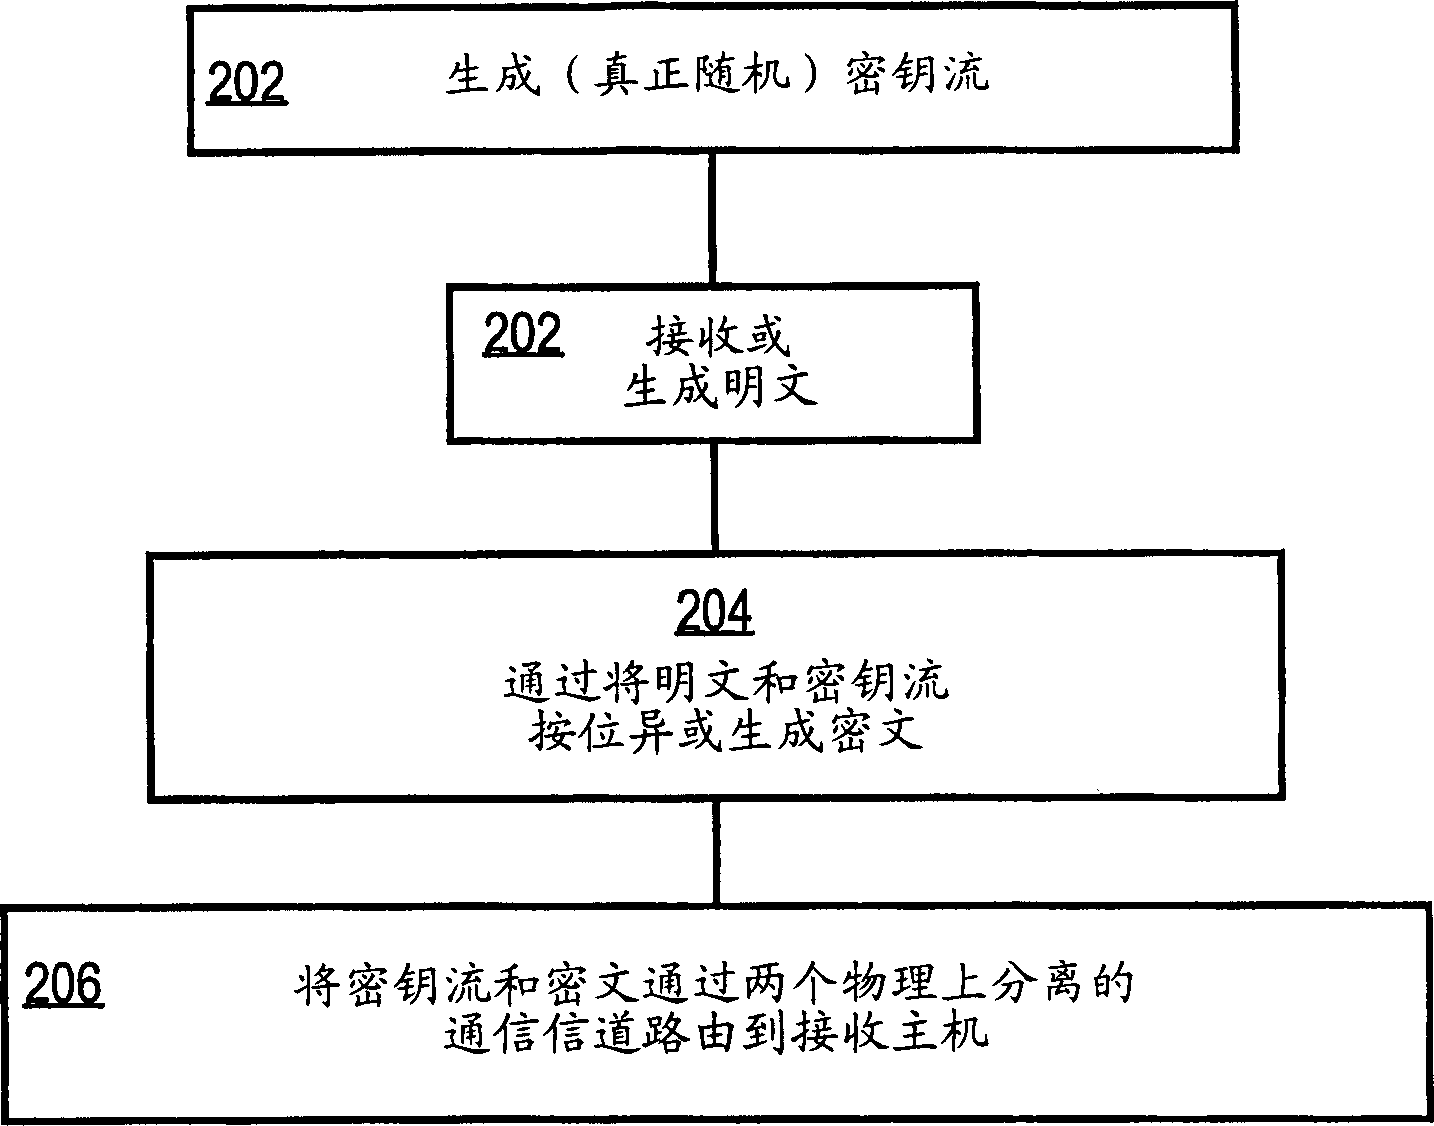 Method and system for securely storing and transmitting data by applying a one-time pad